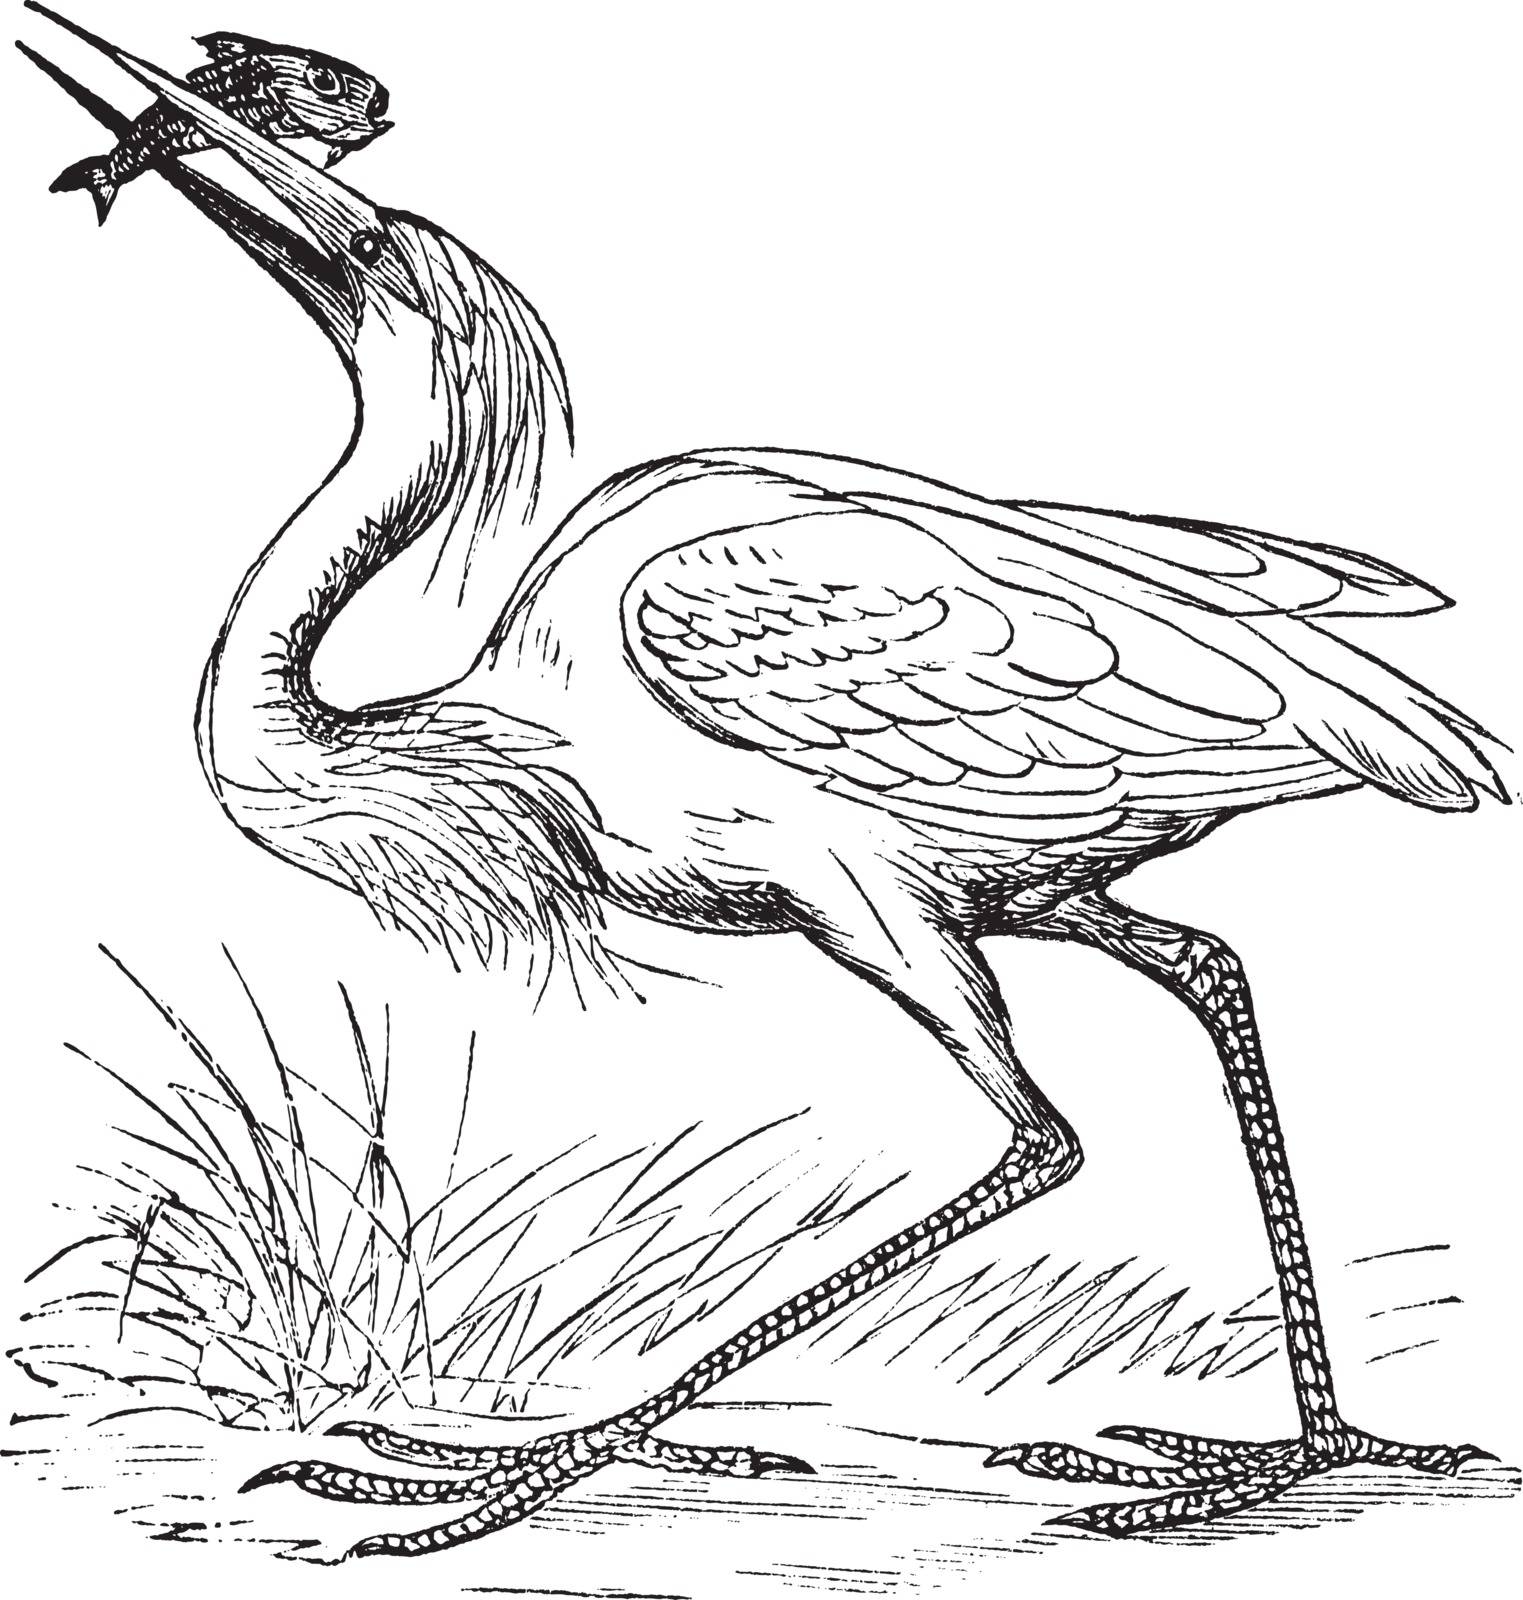 Great White Heron (Ardea occidentalis) vintage engraving. Old engraved illustration of white heron with caught fish.